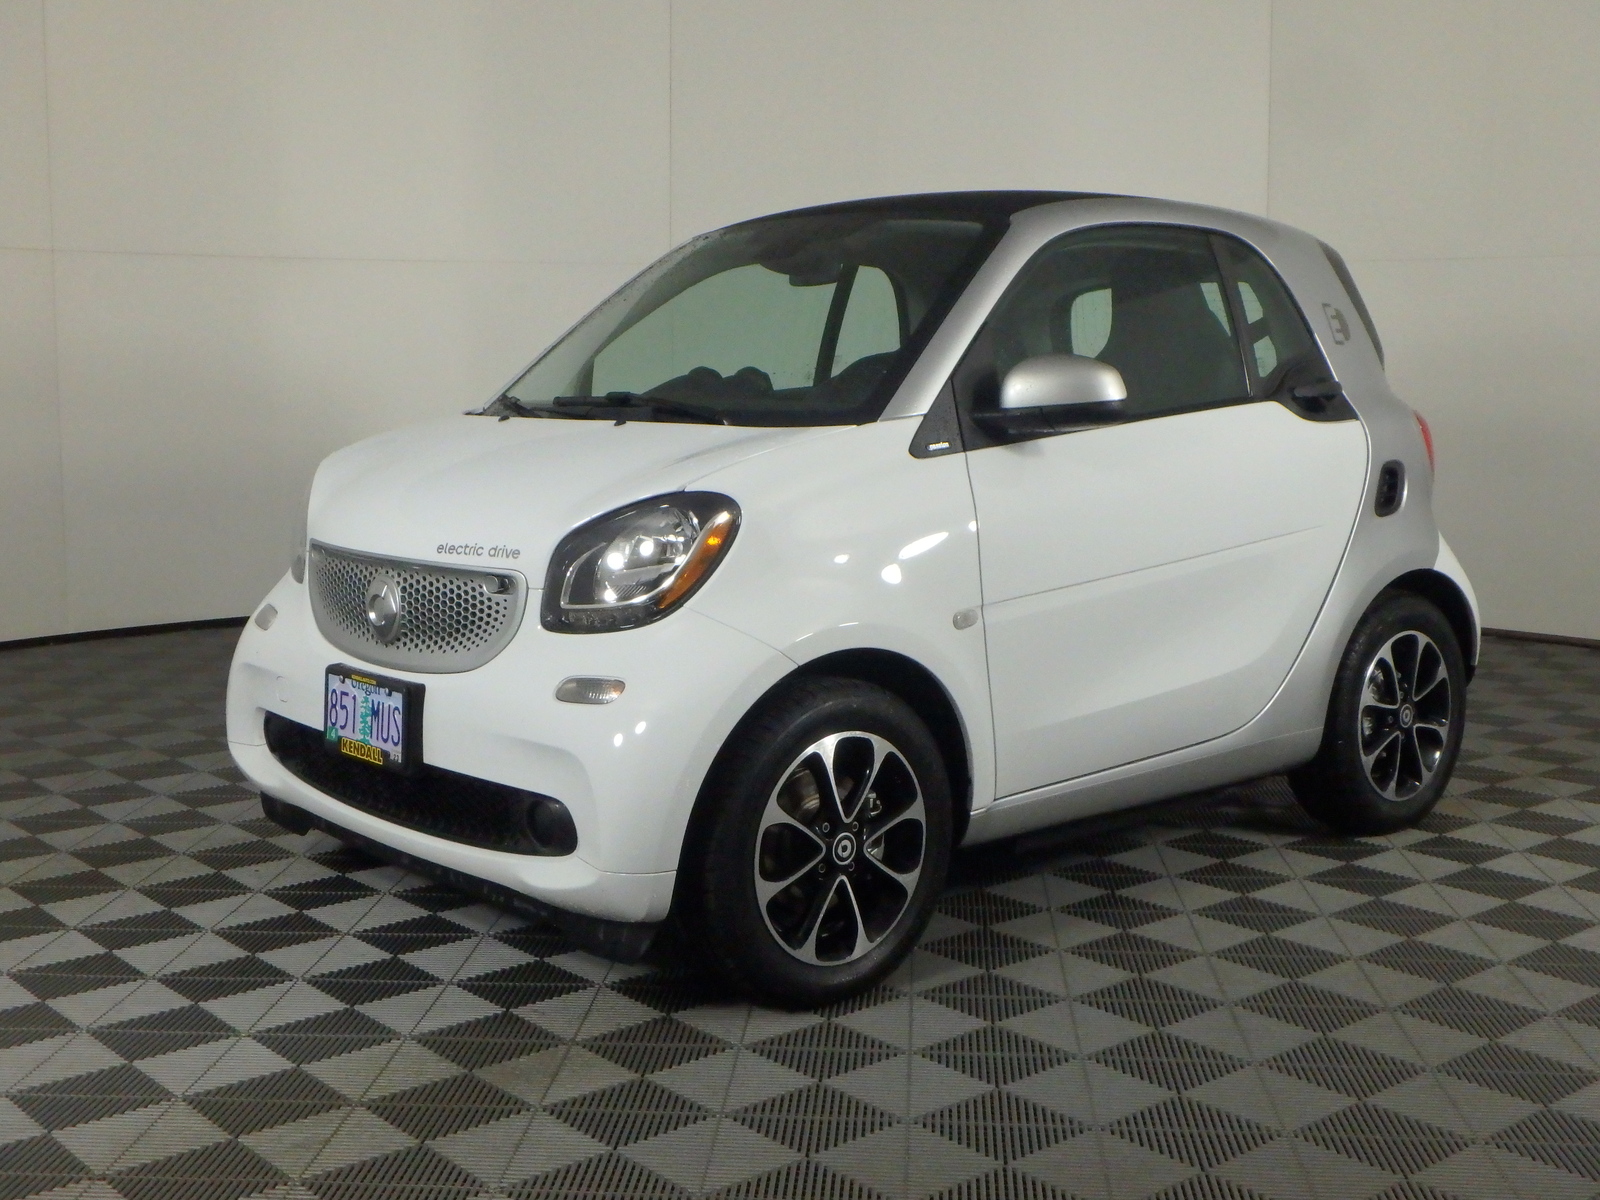 Pre-Owned 2017 smart fortwo electric drive passion coupe 2dr Car in Eugene  #TU10405 | Kendall Auto Oregon